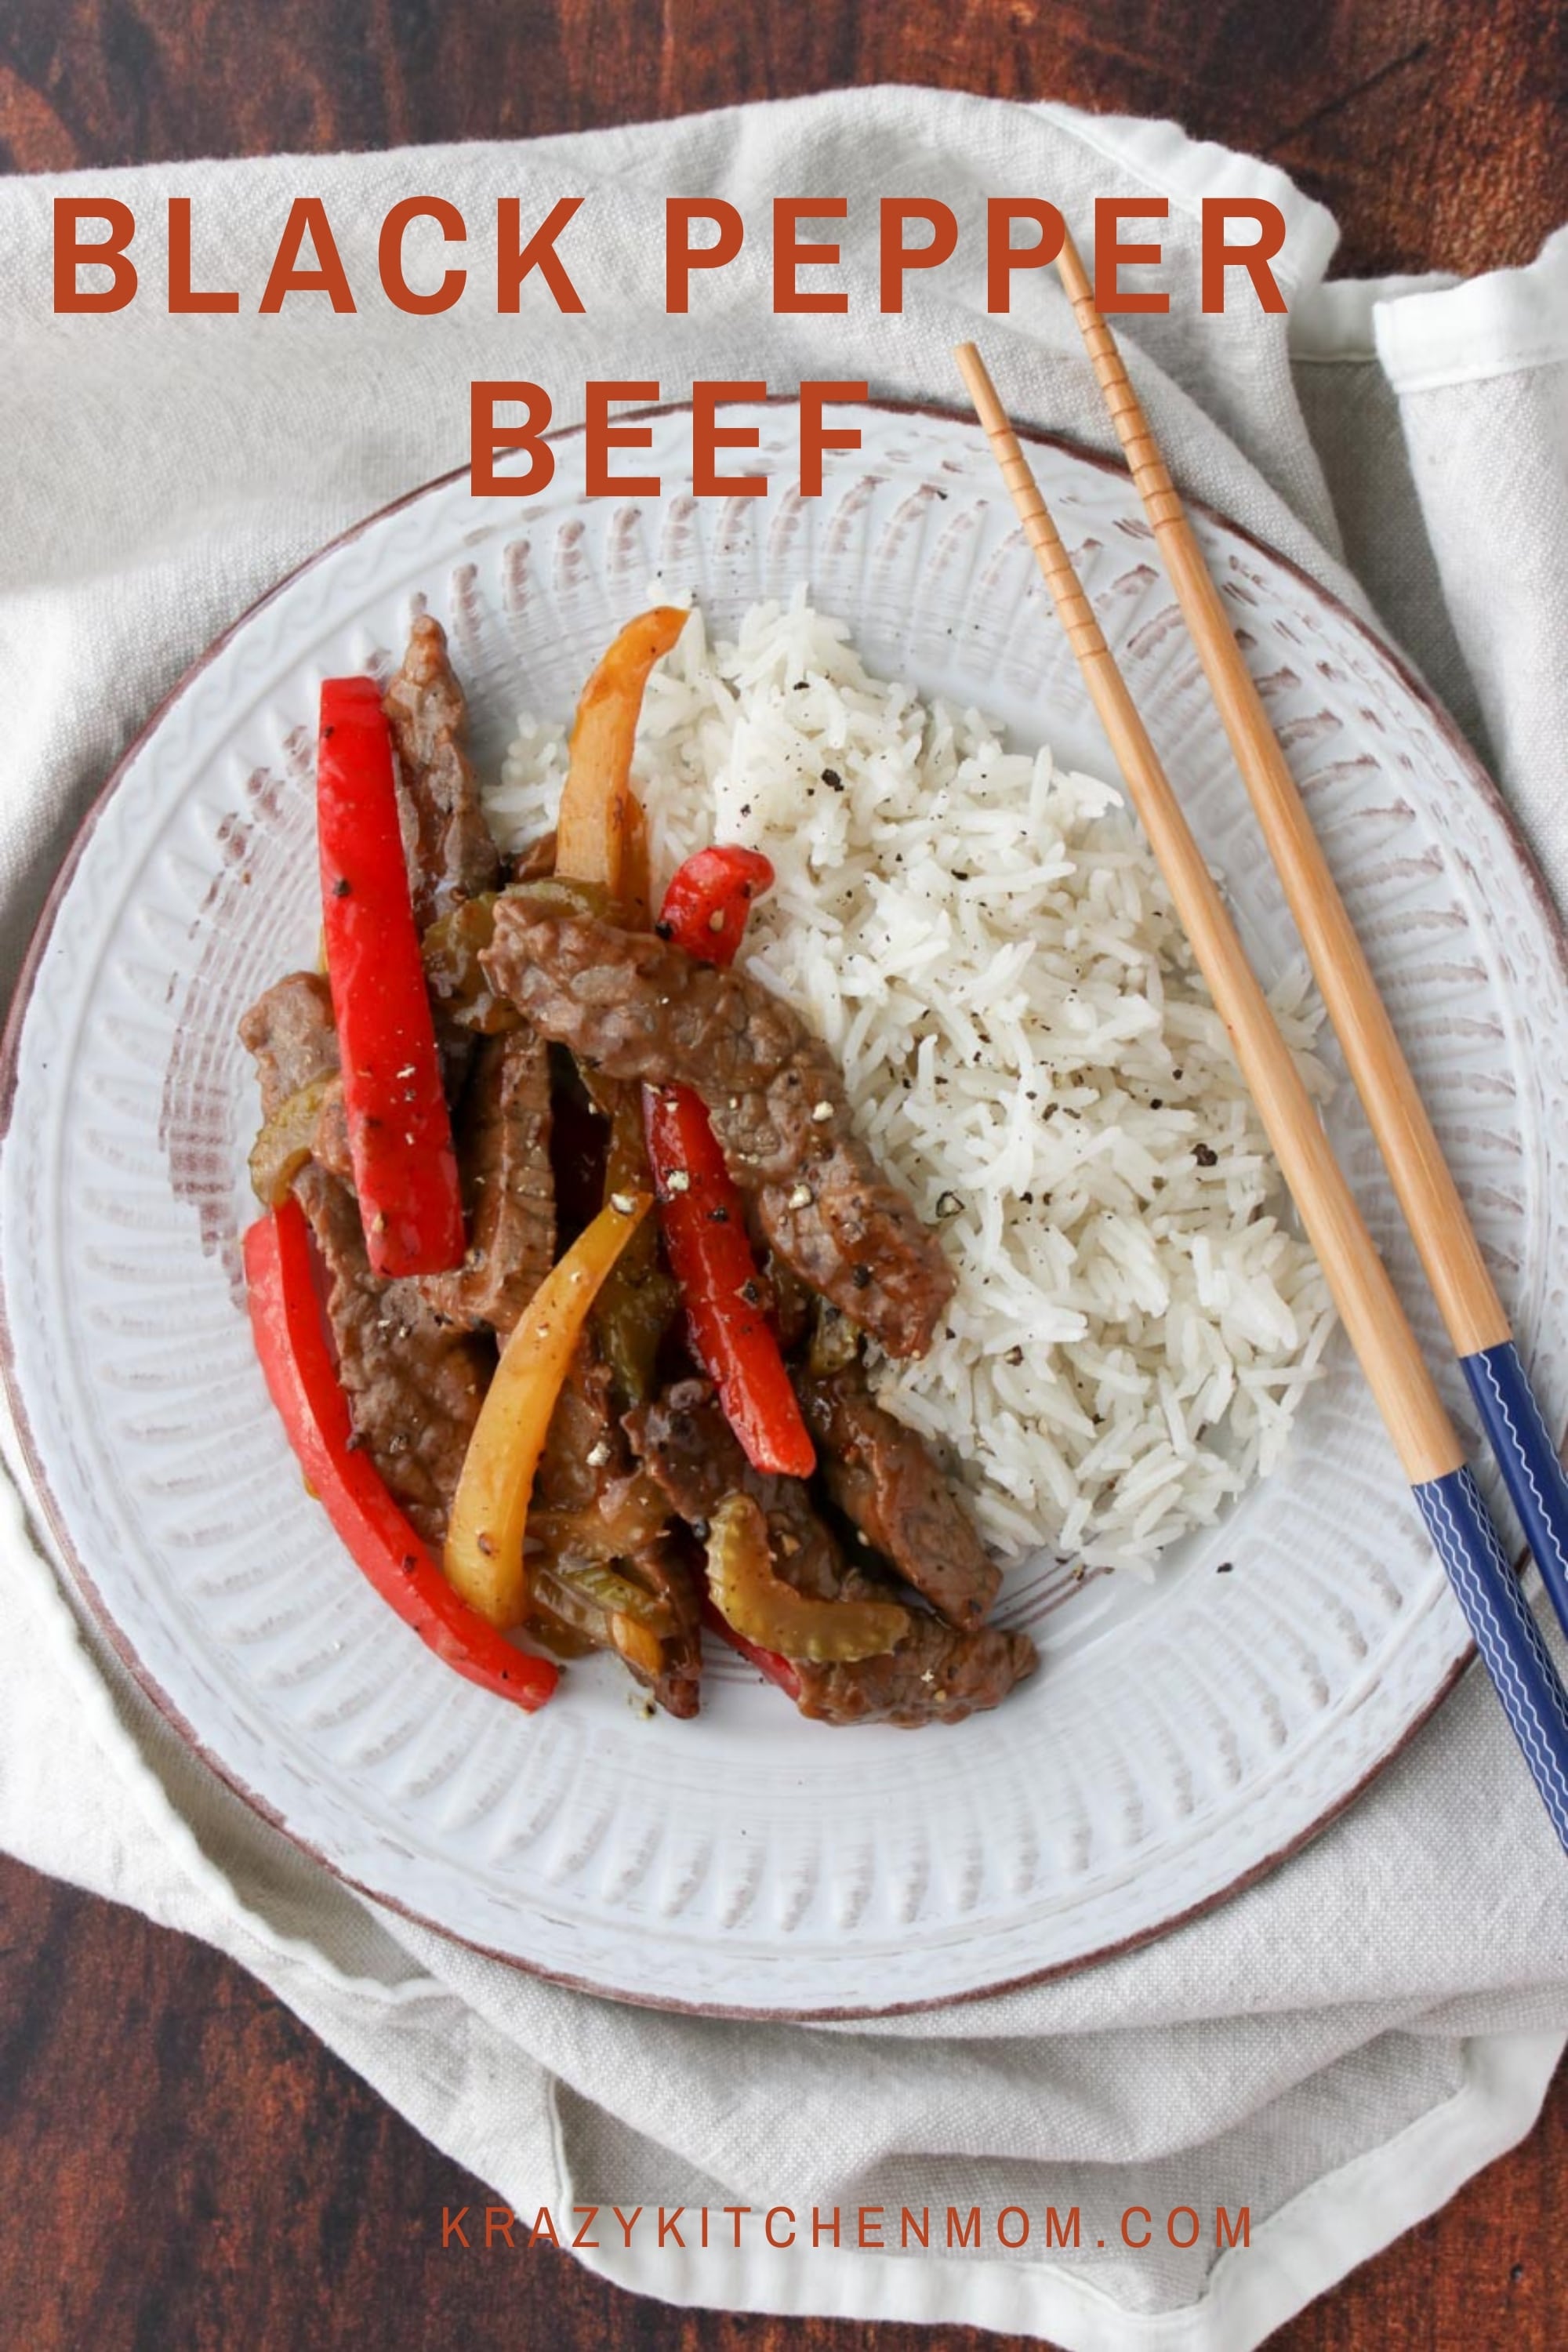 Skip the carryout and make black peppers beef at home. It's easy, rich, and full of flavor. Perfect for any weeknight dinner. The sauce in this recipe is sweet and sticky with the deep woody taste of black pepper and a crunch from the vegetables.  via @krazykitchenmom